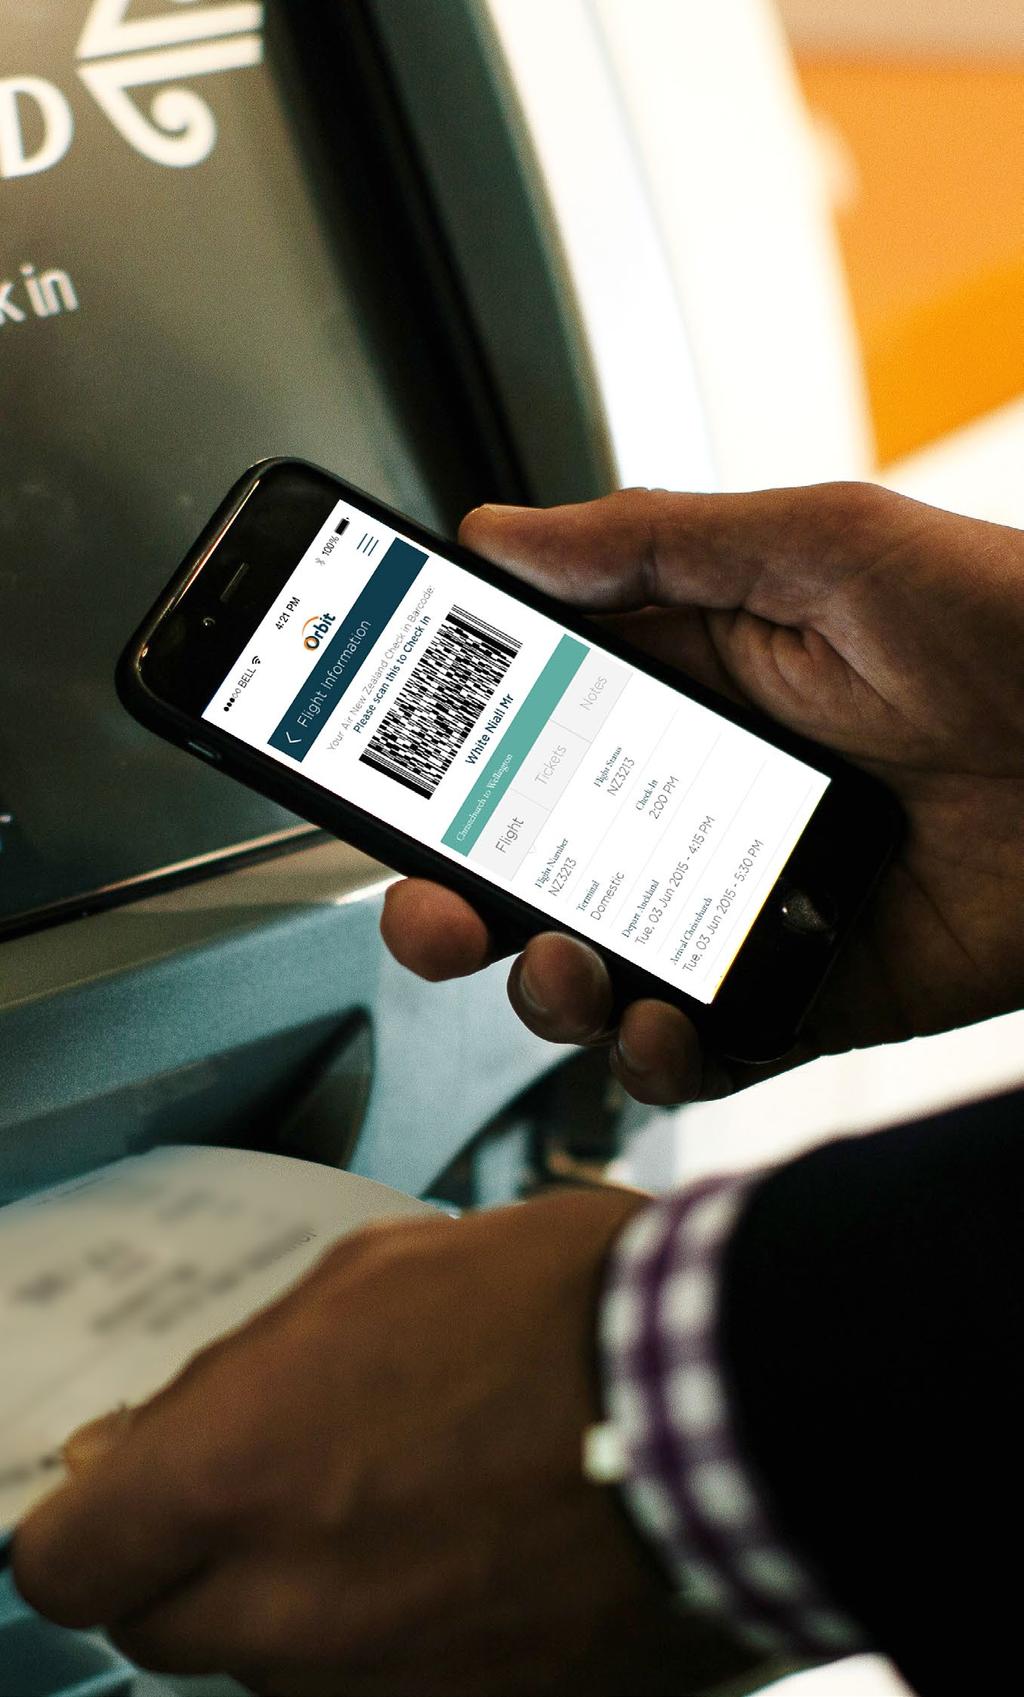 Key Features Flight check-in For Air New Zealand and Jetstar flights you can check in through the App. The Orbit App displays the Air NZ and Jetstar barcodes for check-in at the kiosk.